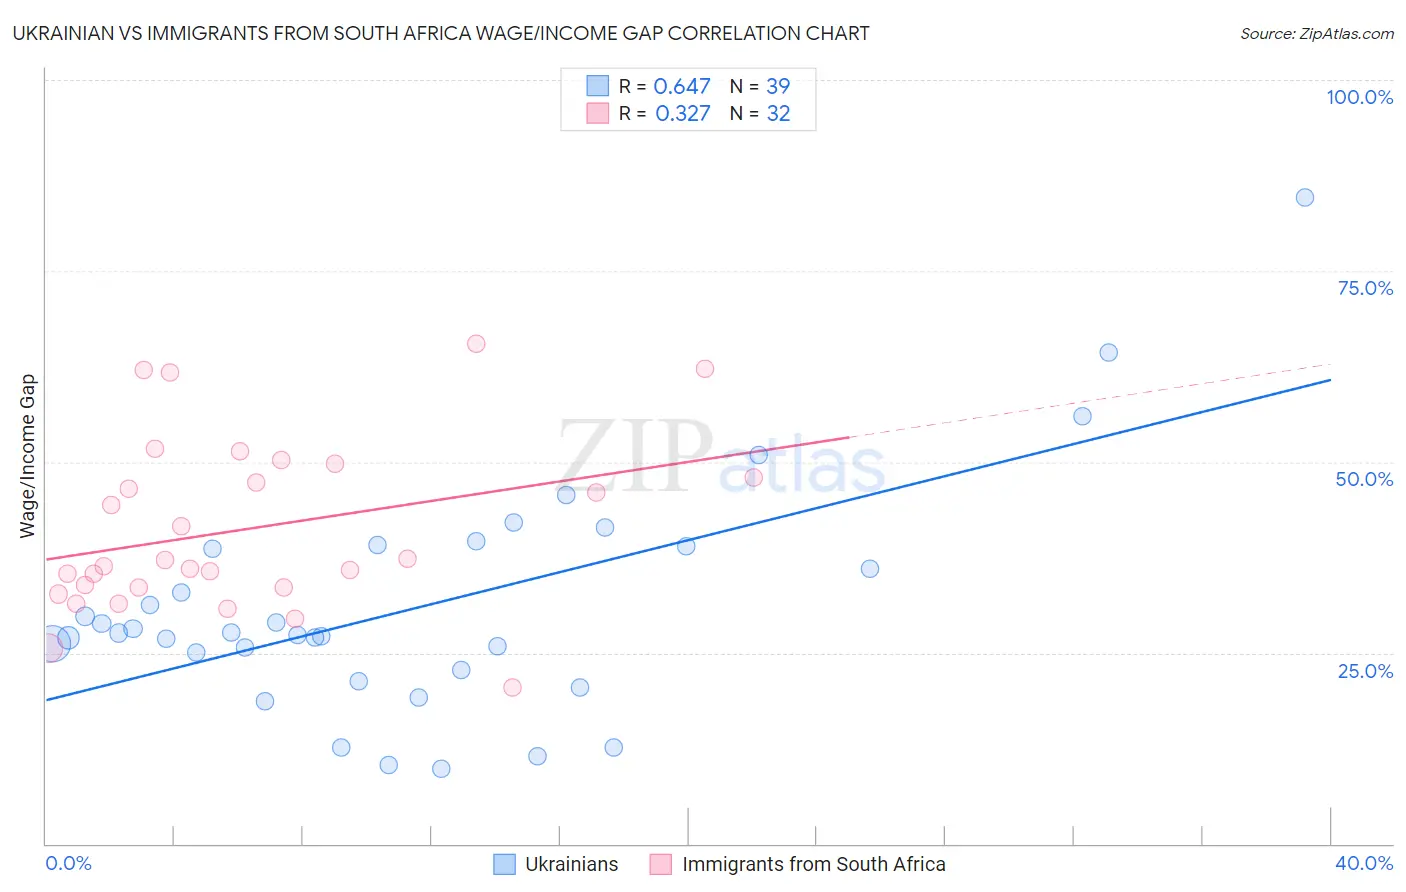 Ukrainian vs Immigrants from South Africa Wage/Income Gap